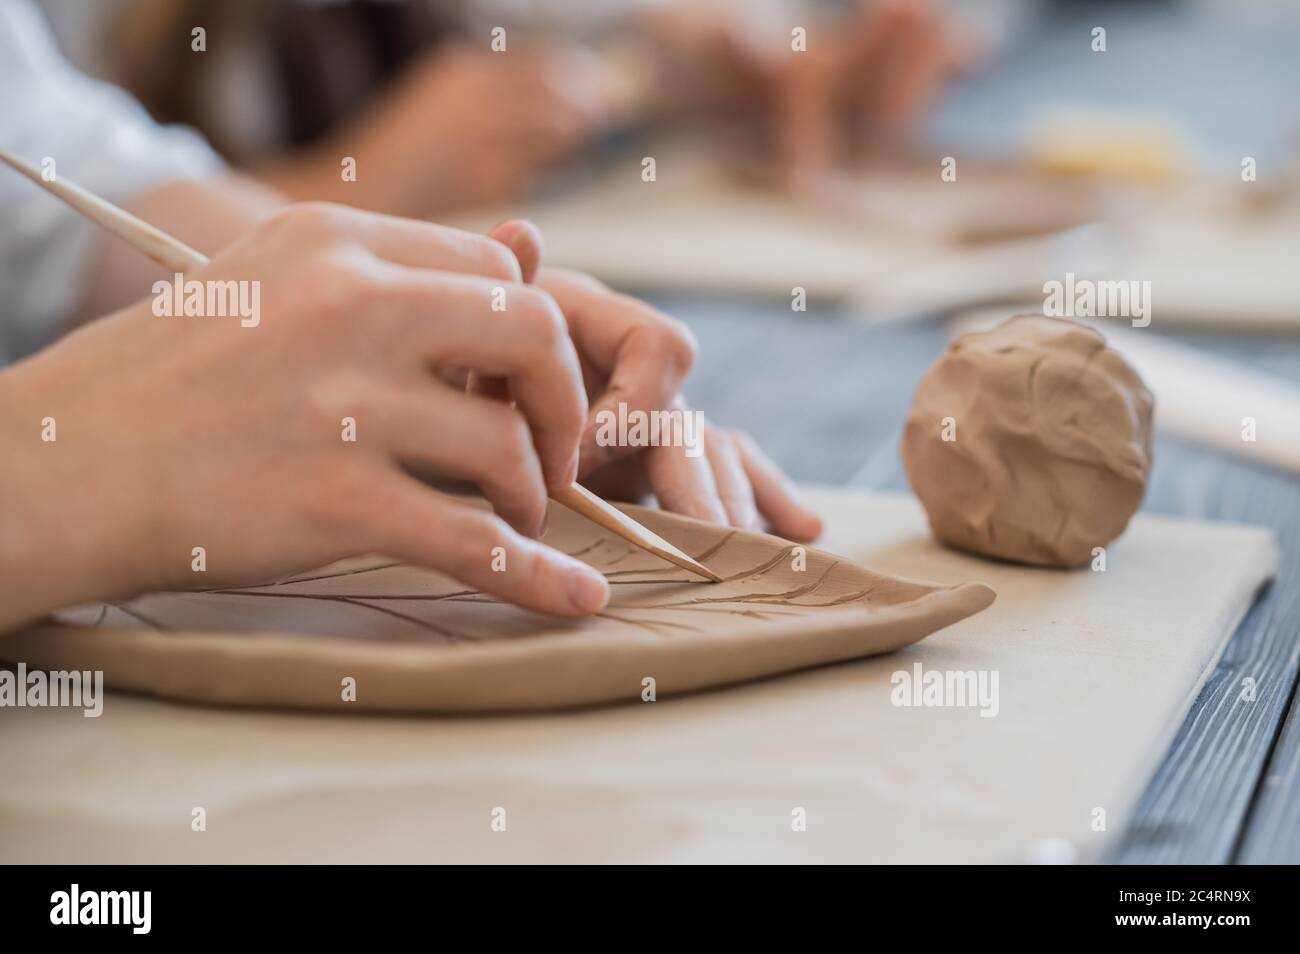 Female potters hand making clay pottery at the table with a different wooden tools close up. Stock Photo